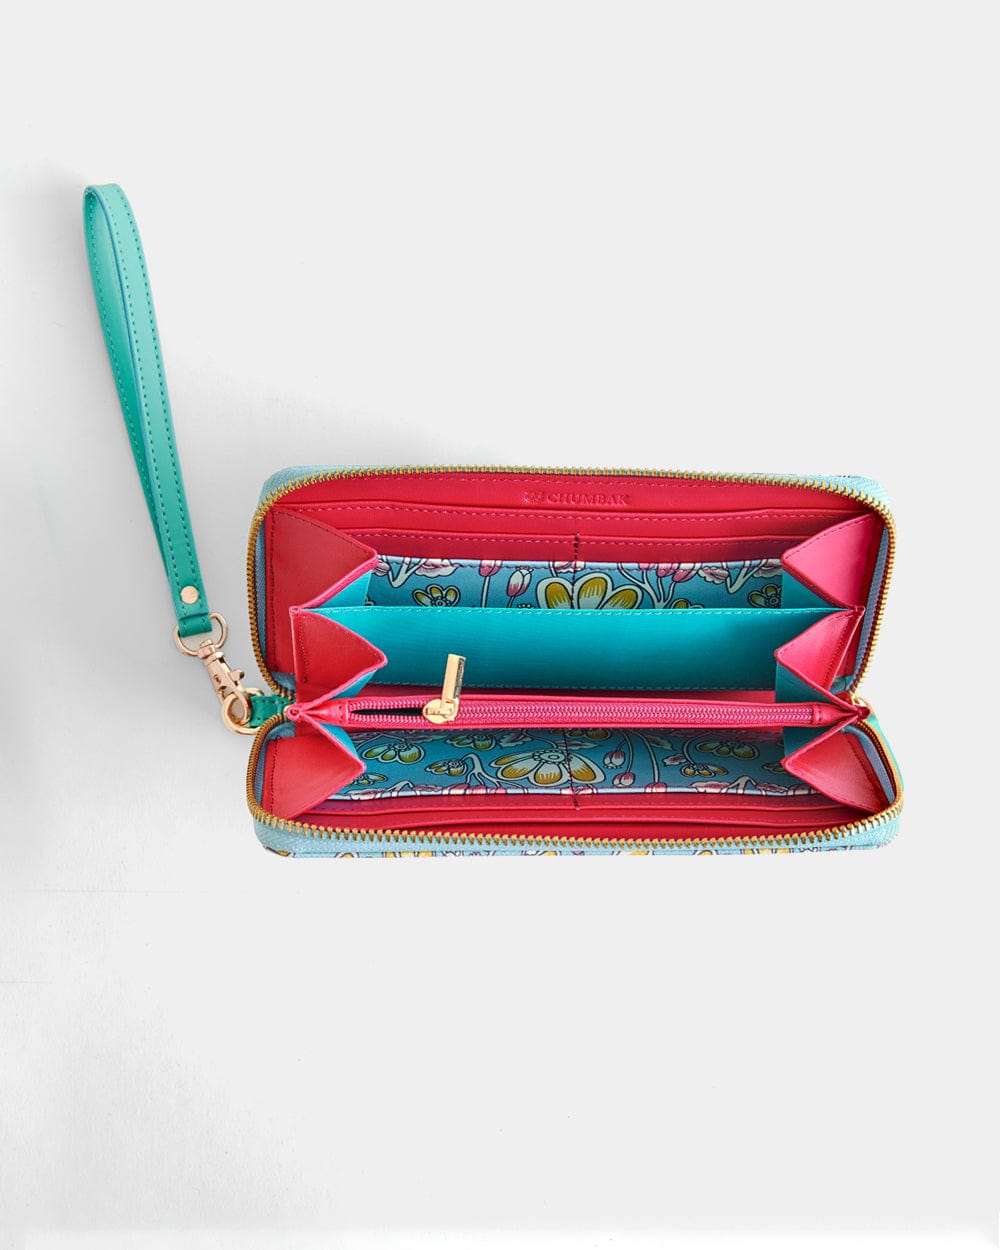 Chumbak Tokyo Blooms and Boons Wristlet - Teal